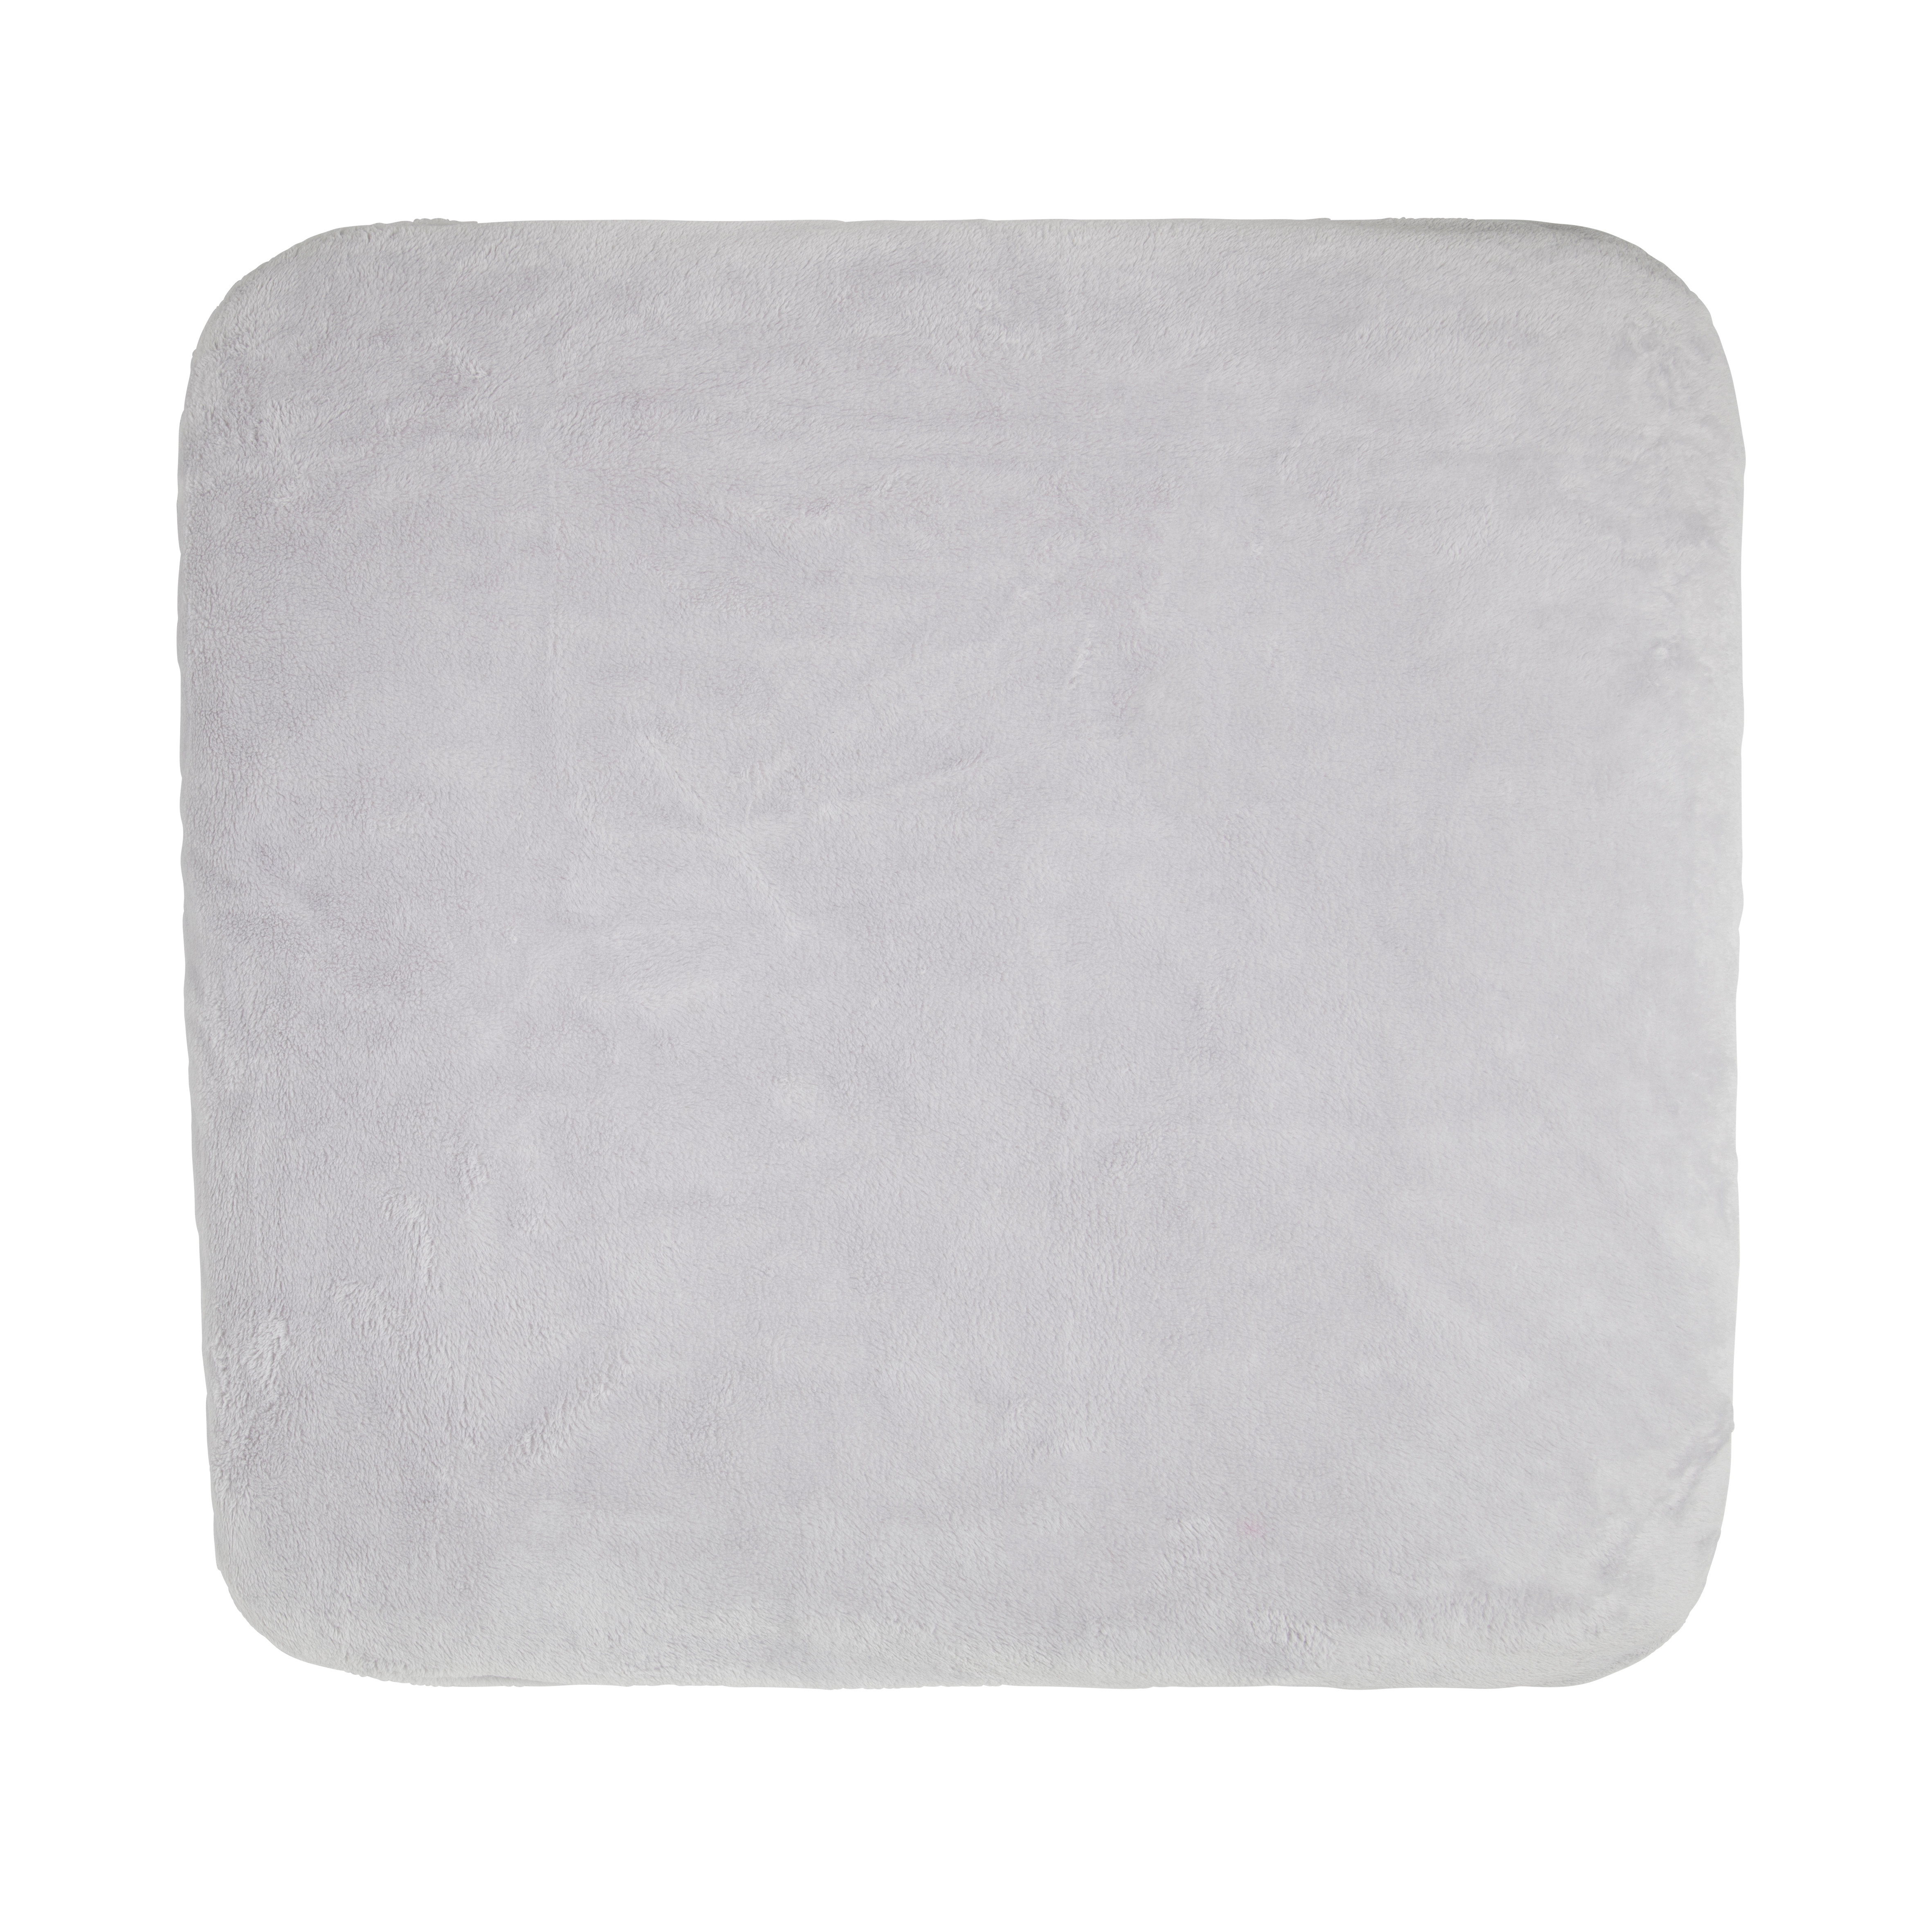 Changing pad cover Cozy dusty grey - 75x85